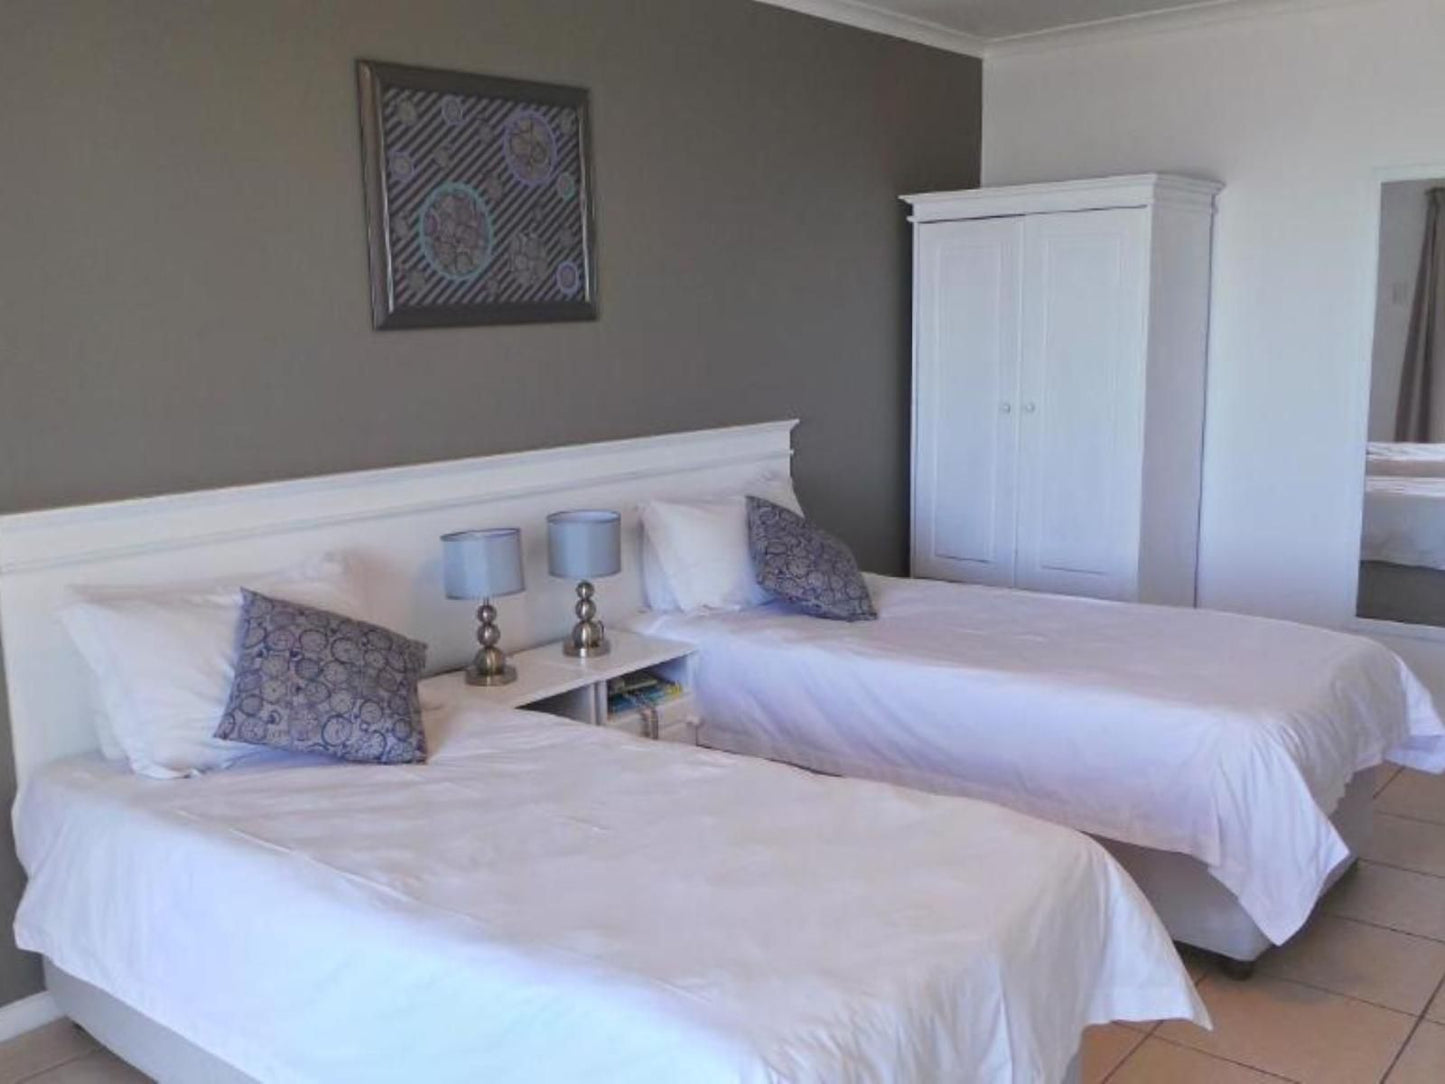 Chapman Hotel And Conference Centre Humewood Port Elizabeth Eastern Cape South Africa Bedroom